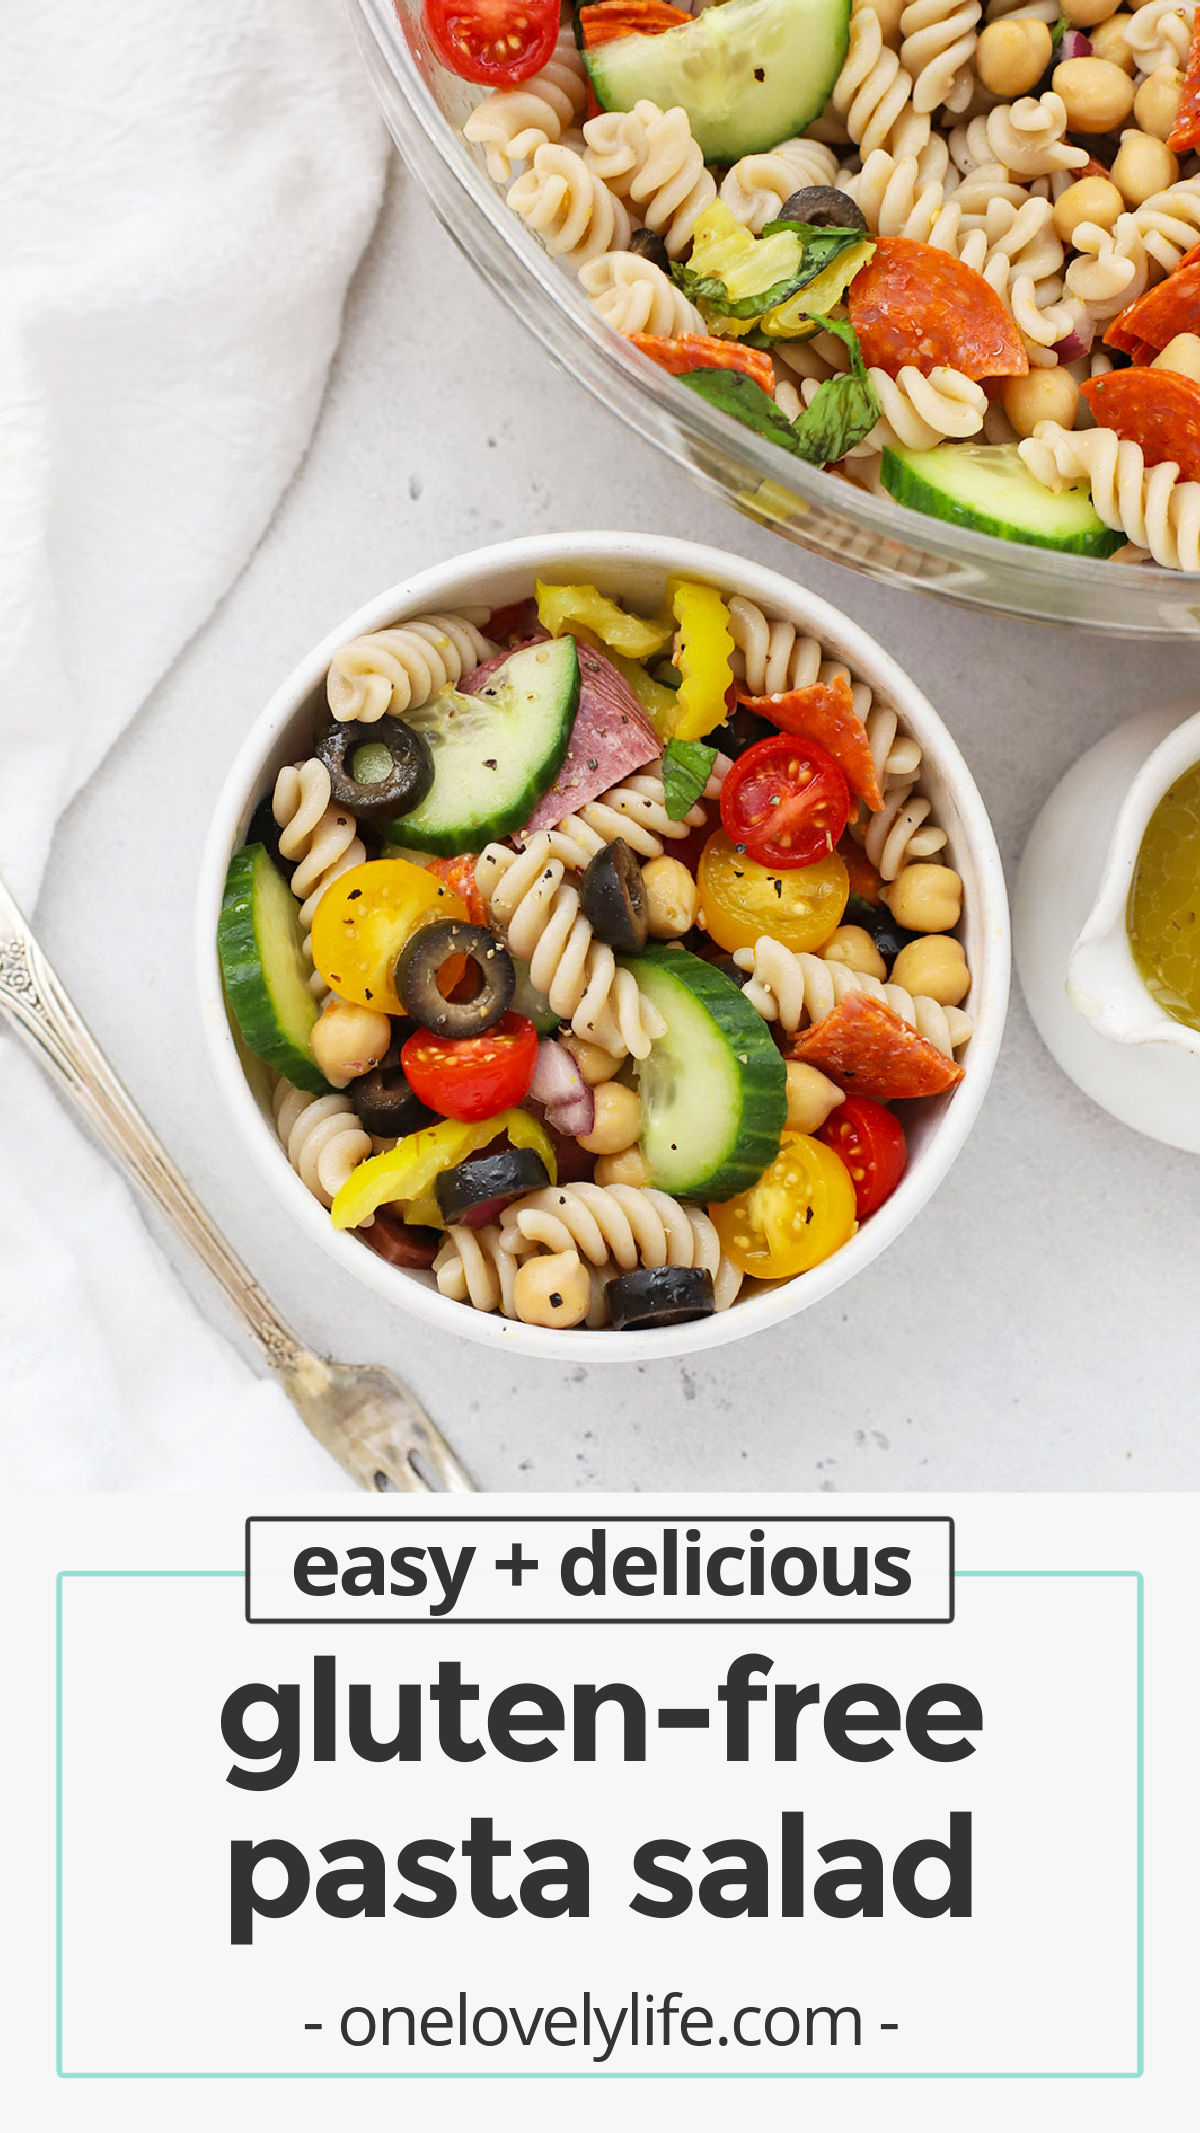 Easy Gluten-Free Pasta Salad - This easy salad is made with colorful veggies, layers of flavor, and a quick homemade dressing you're SURE to love! (Gluten-Free, Dairy-Free) // gluten free salad recipe / gluten free Italian pasta salad / gluten-free antipasto pasta salad / the BEST gluten-free pasta salad recipe / easy summer salads / gluten-free potluck recipe / gluten-free picnic recipe / gluten free salad